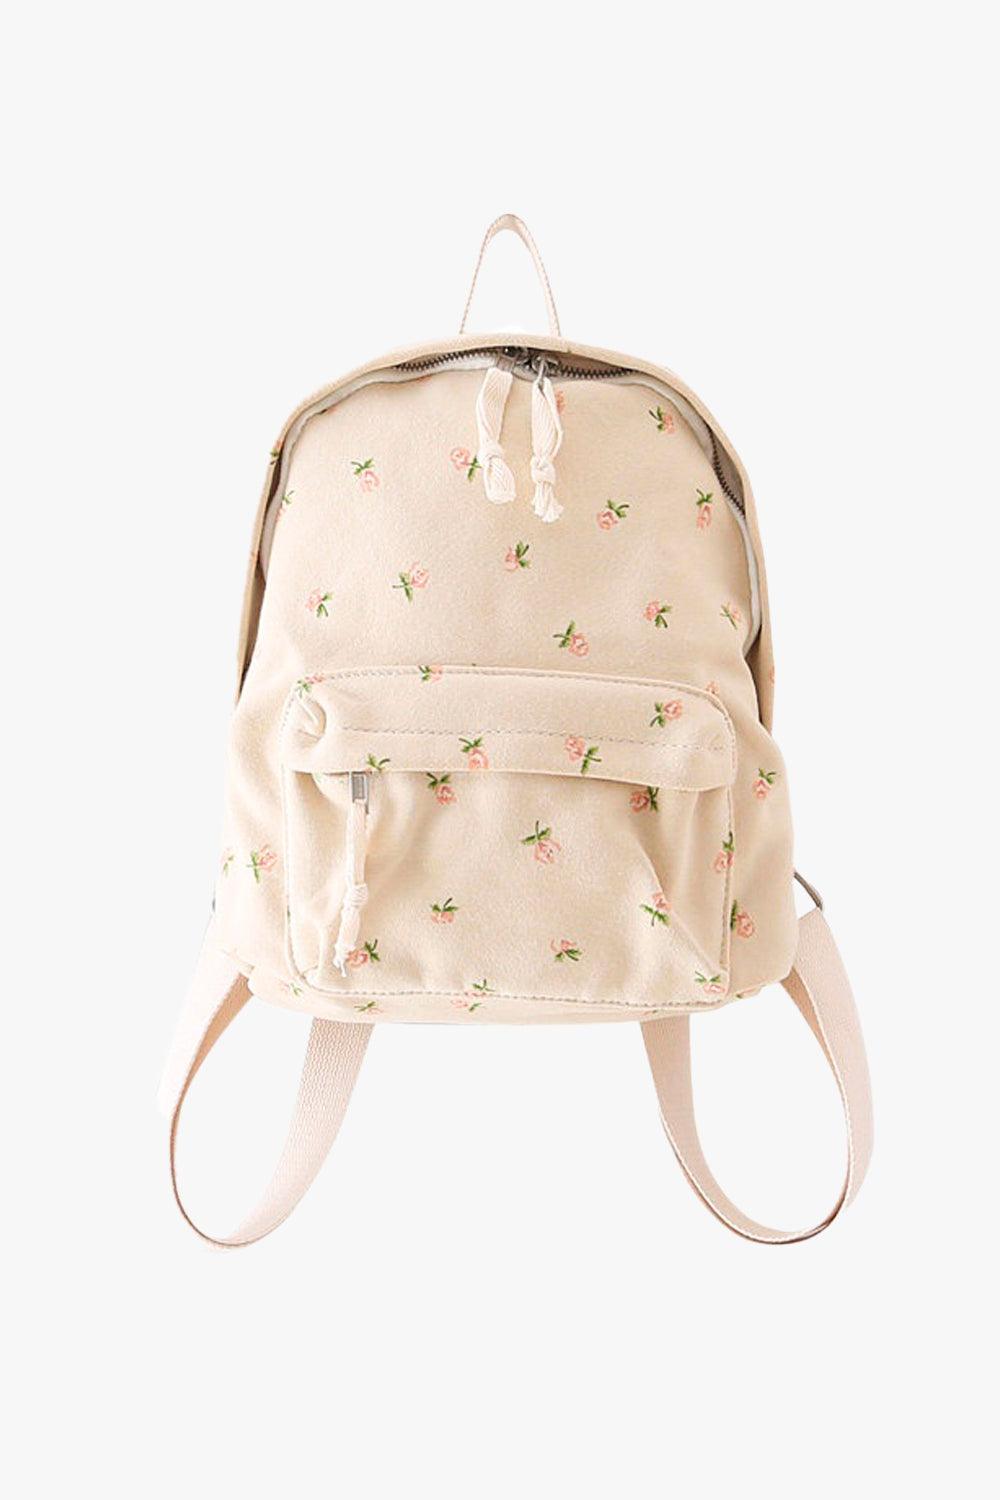 Cute Floral Soft Girl Backpack - Aesthetic Clothes Shop